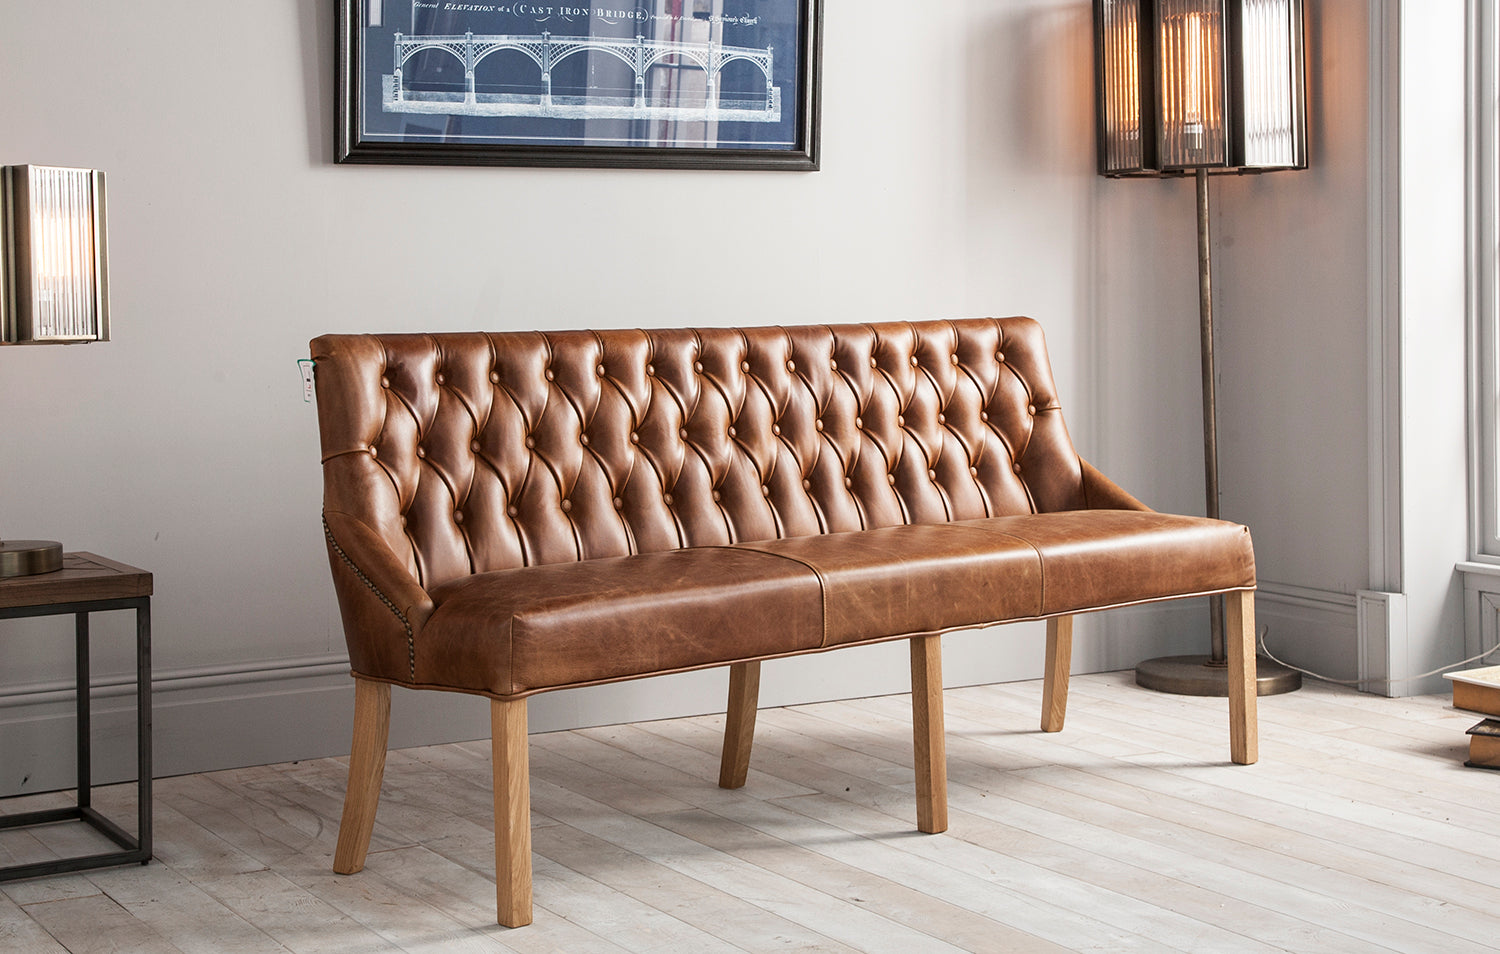 Stanton Leather Bench from Top Secret Furniture Outlet